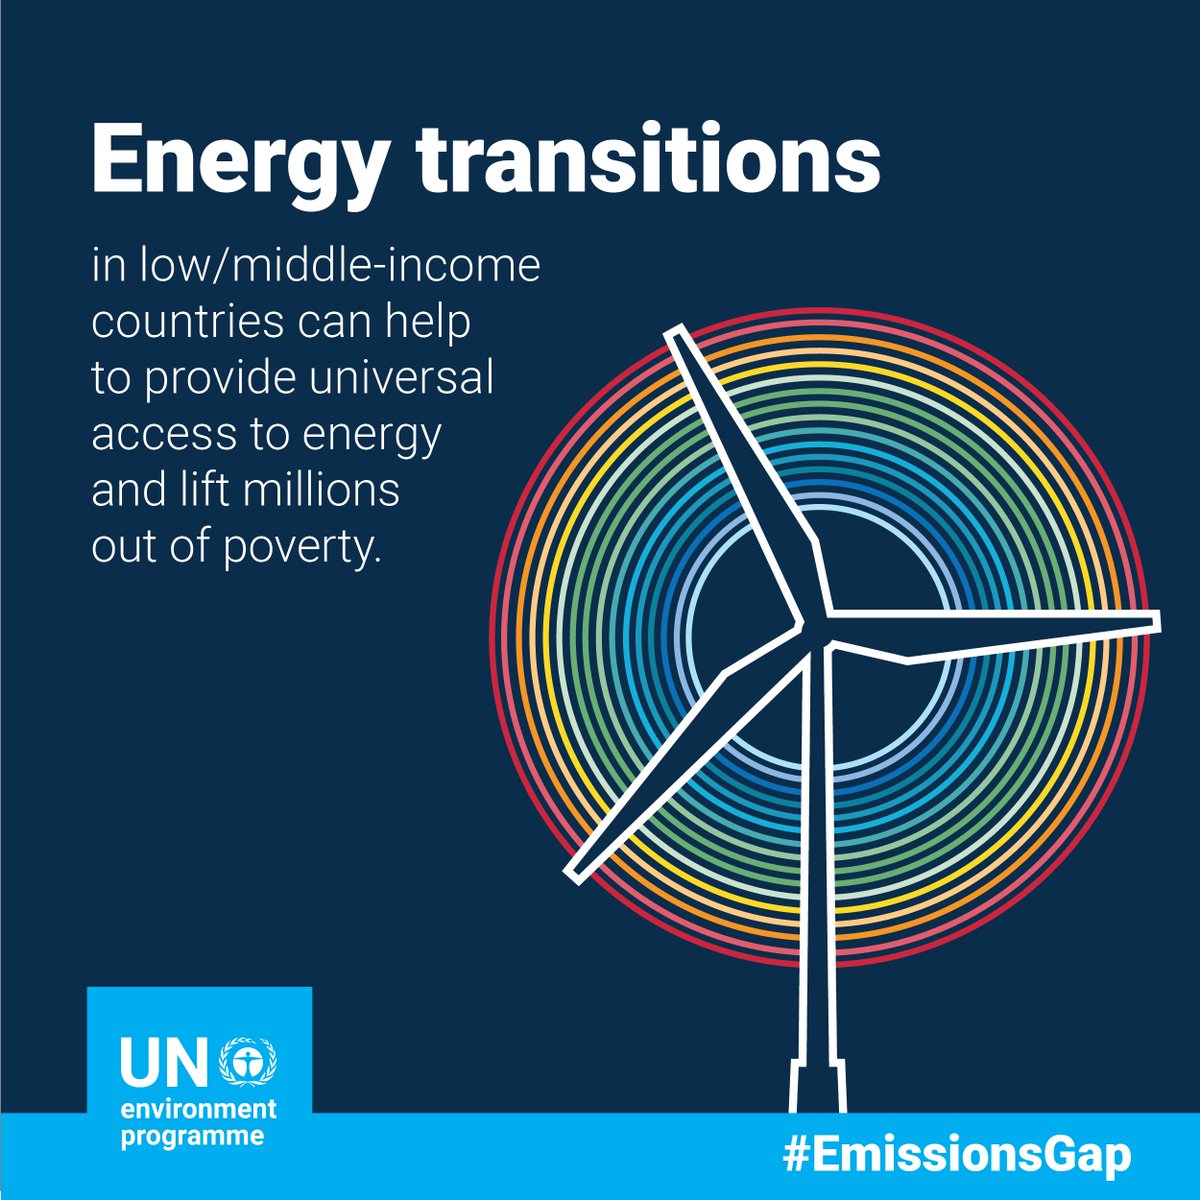 Energy demand can be met efficiently and equitably with low-carbon energy as renewables become more affordable.

Full insights from UNEP's 2023 #EmissionsGap Report: unep.org/resources/emis…